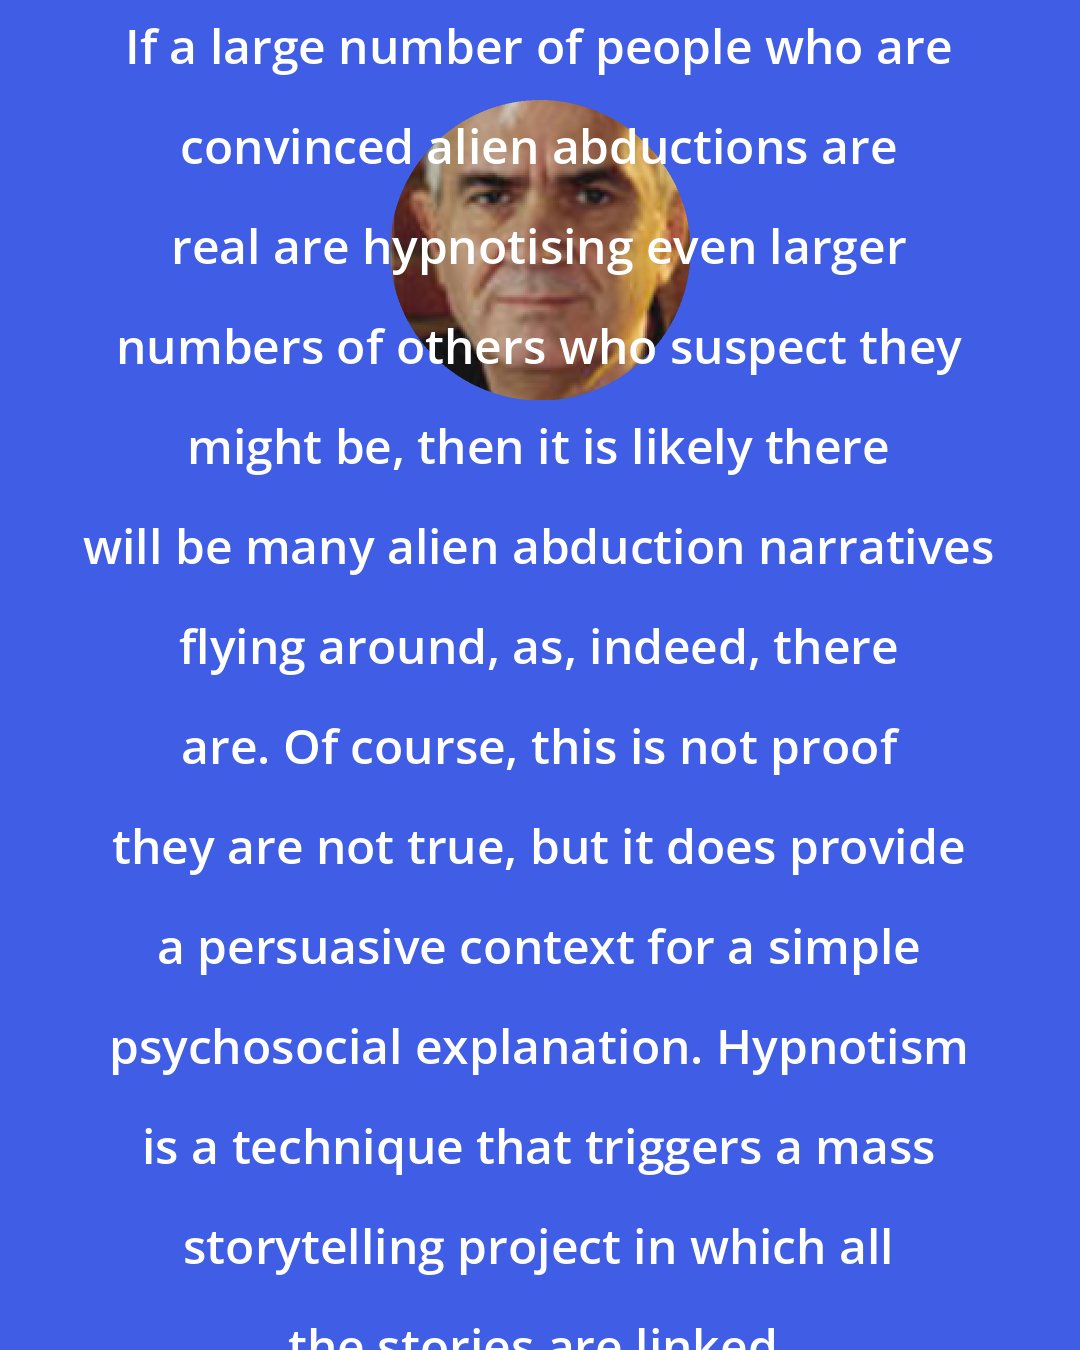 Bryan Appleyard: If a large number of people who are convinced alien abductions are real are hypnotising even larger numbers of others who suspect they might be, then it is likely there will be many alien abduction narratives flying around, as, indeed, there are. Of course, this is not proof they are not true, but it does provide a persuasive context for a simple psychosocial explanation. Hypnotism is a technique that triggers a mass storytelling project in which all the stories are linked.